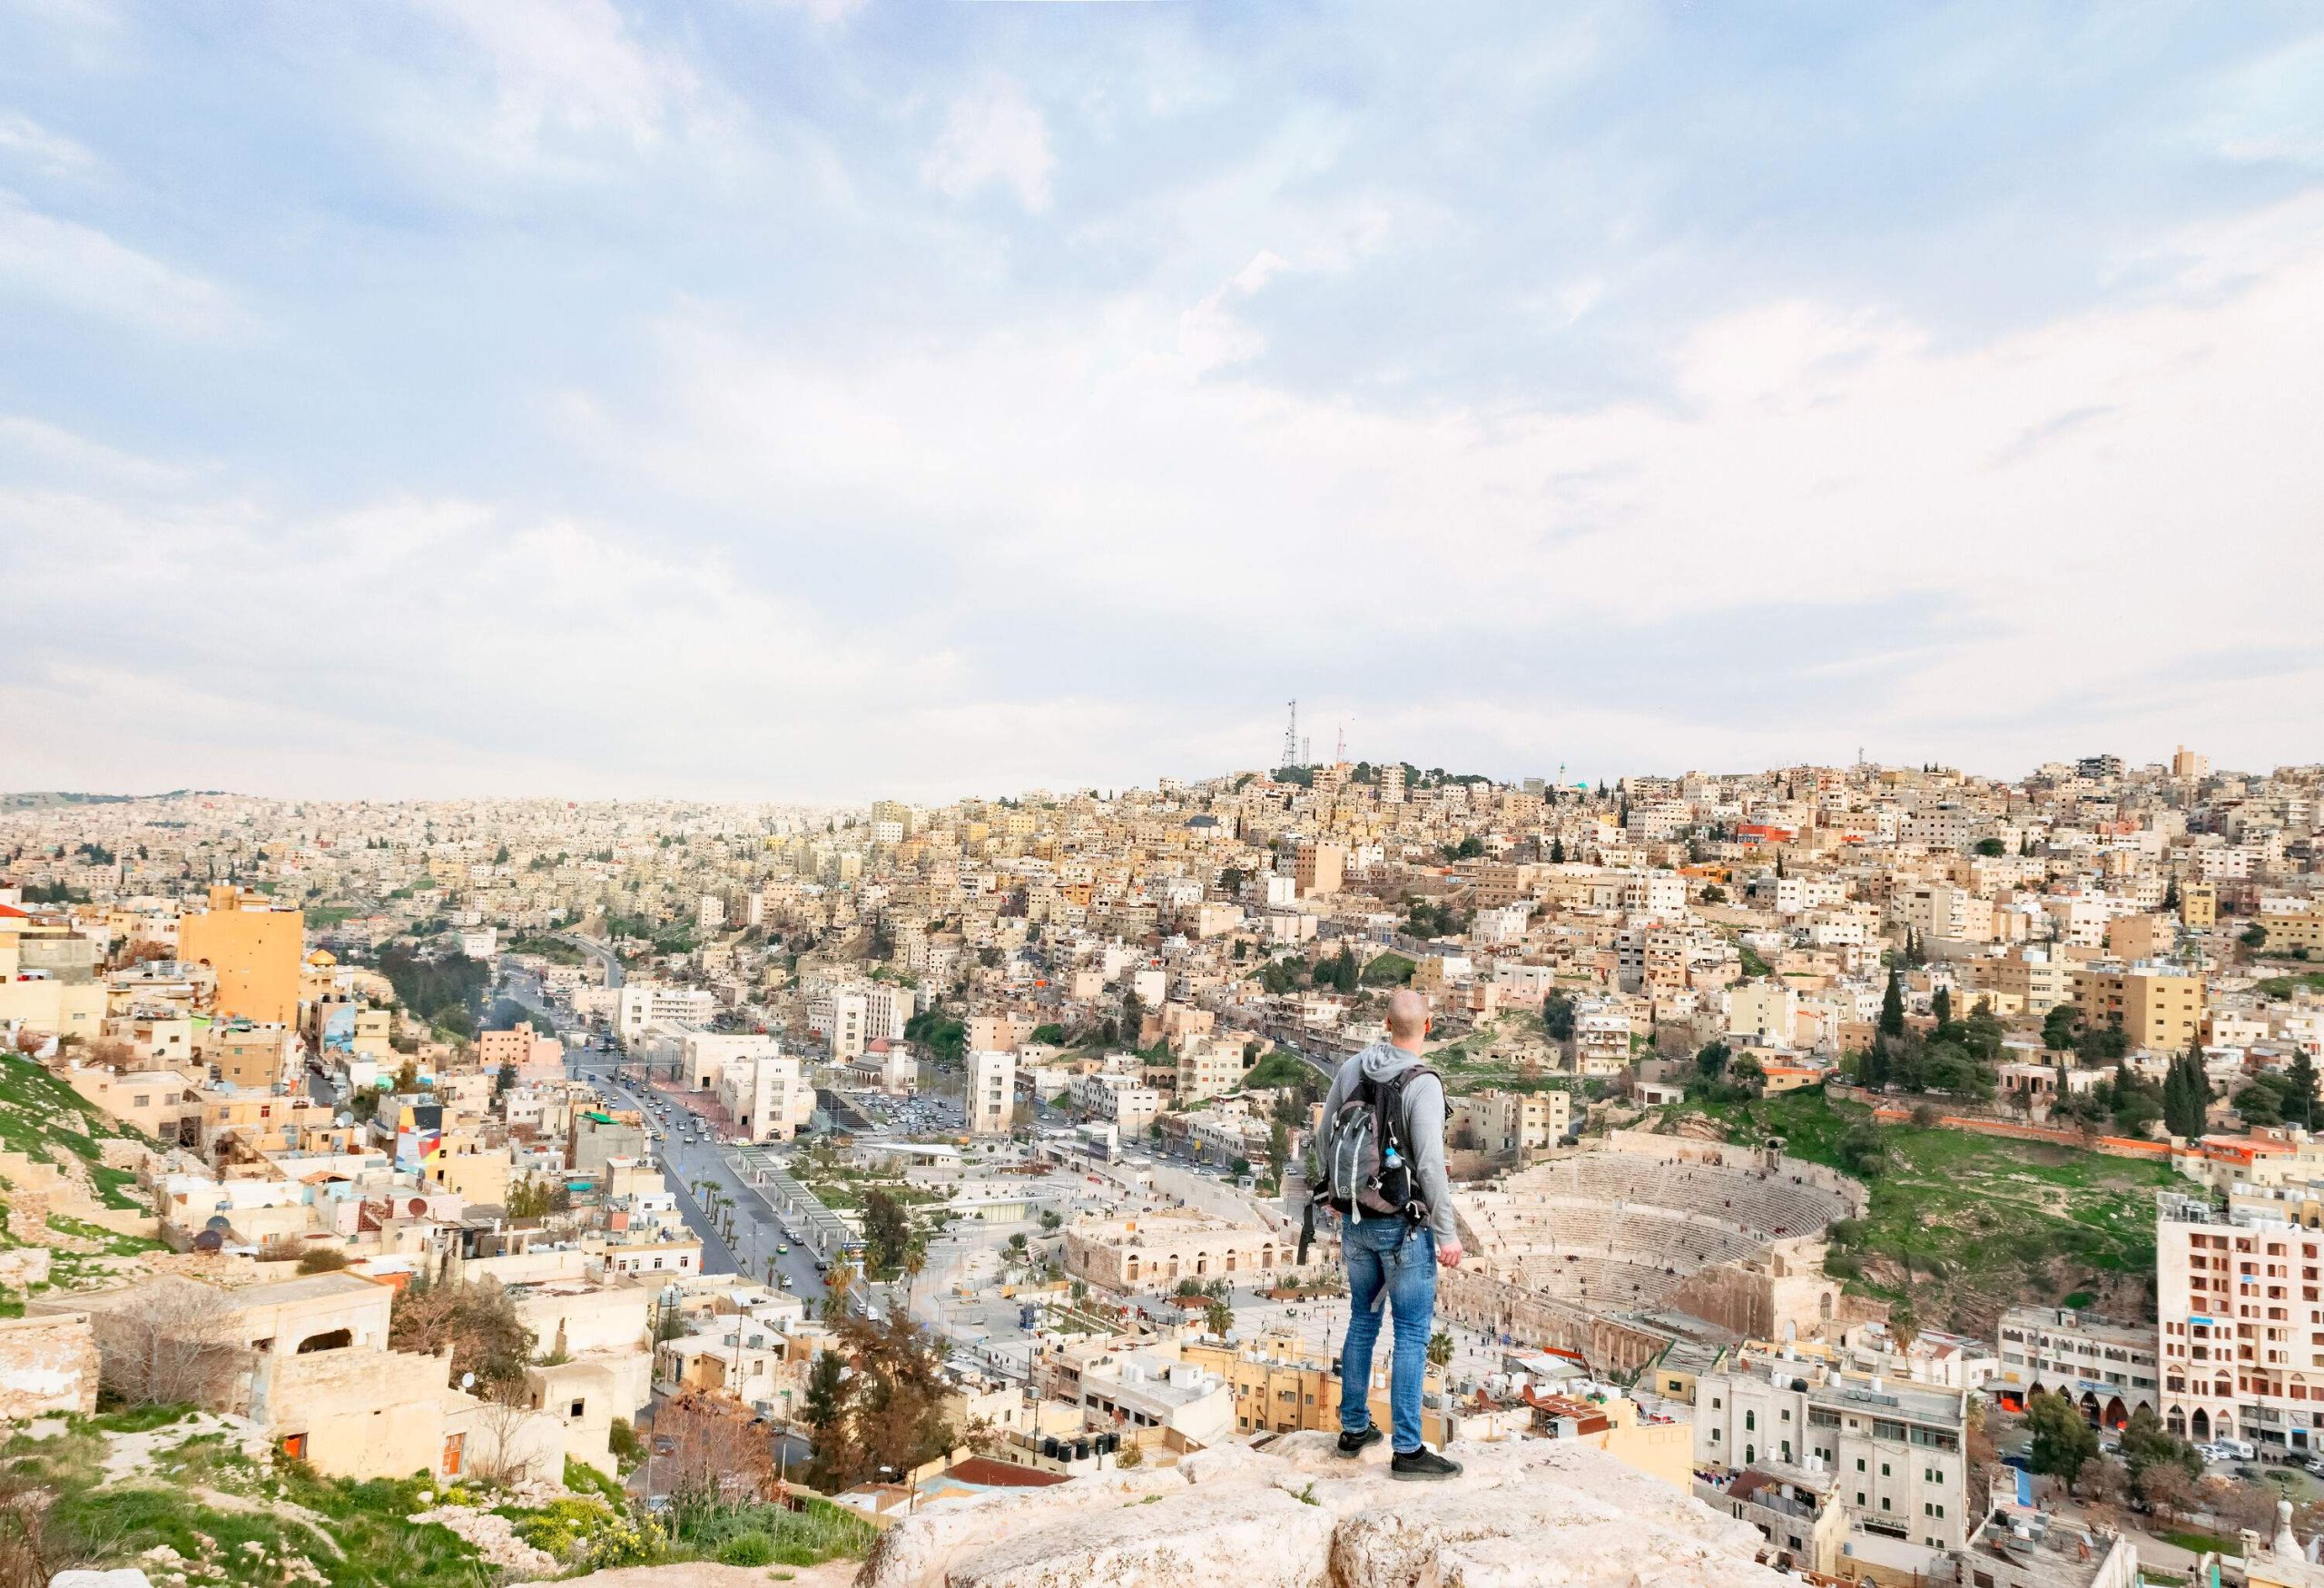 A man stands atop a hill overlooking a bustling metropolitan with a cluster of buildings uphill and a historic Roman amphitheatre.